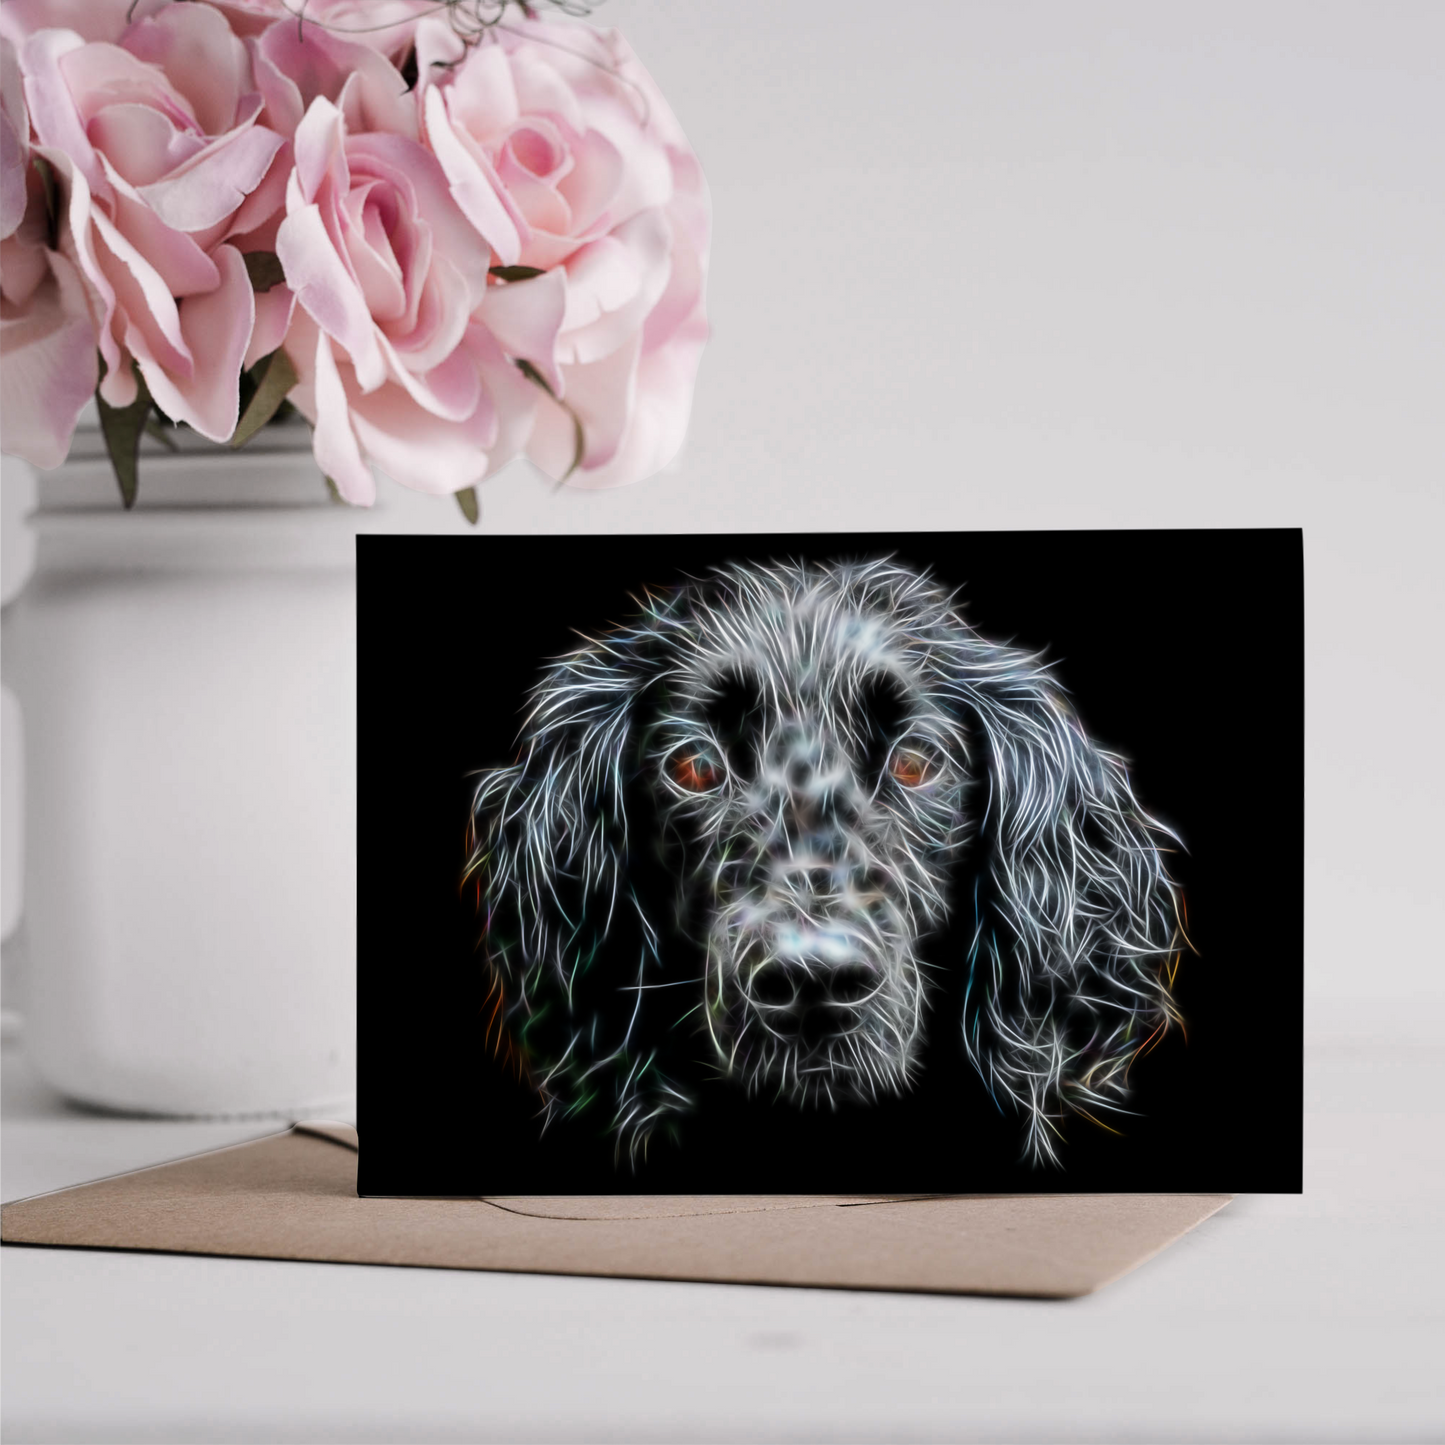 Black Working Cocker Spaniel Greeting Card Blank Inside for Birthdays or any other Occasion